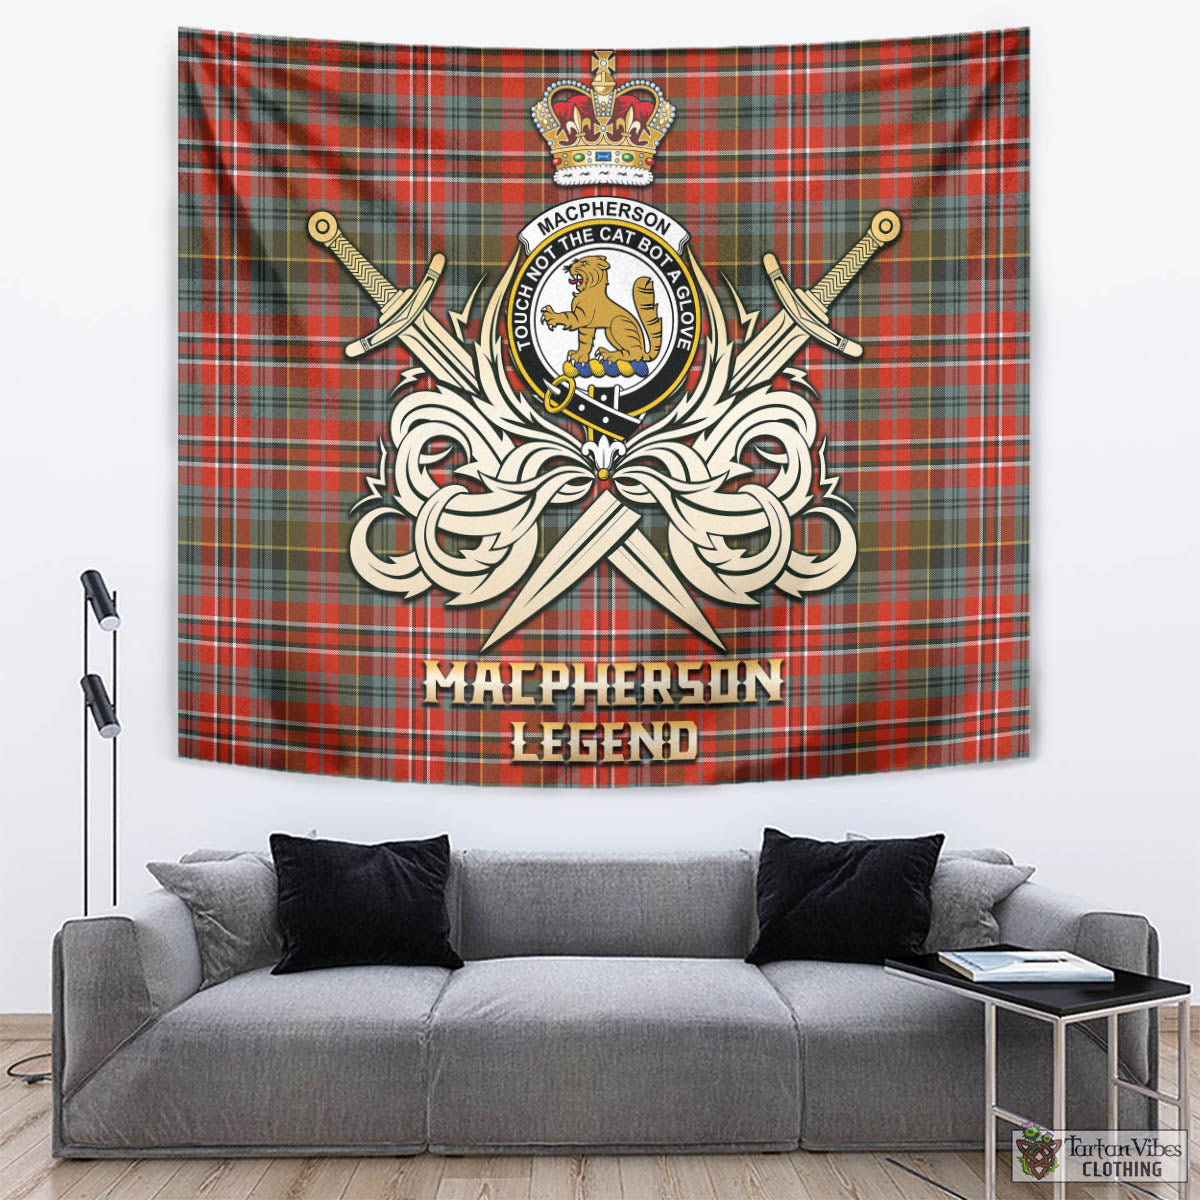 Tartan Vibes Clothing MacPherson Weathered Tartan Tapestry with Clan Crest and the Golden Sword of Courageous Legacy